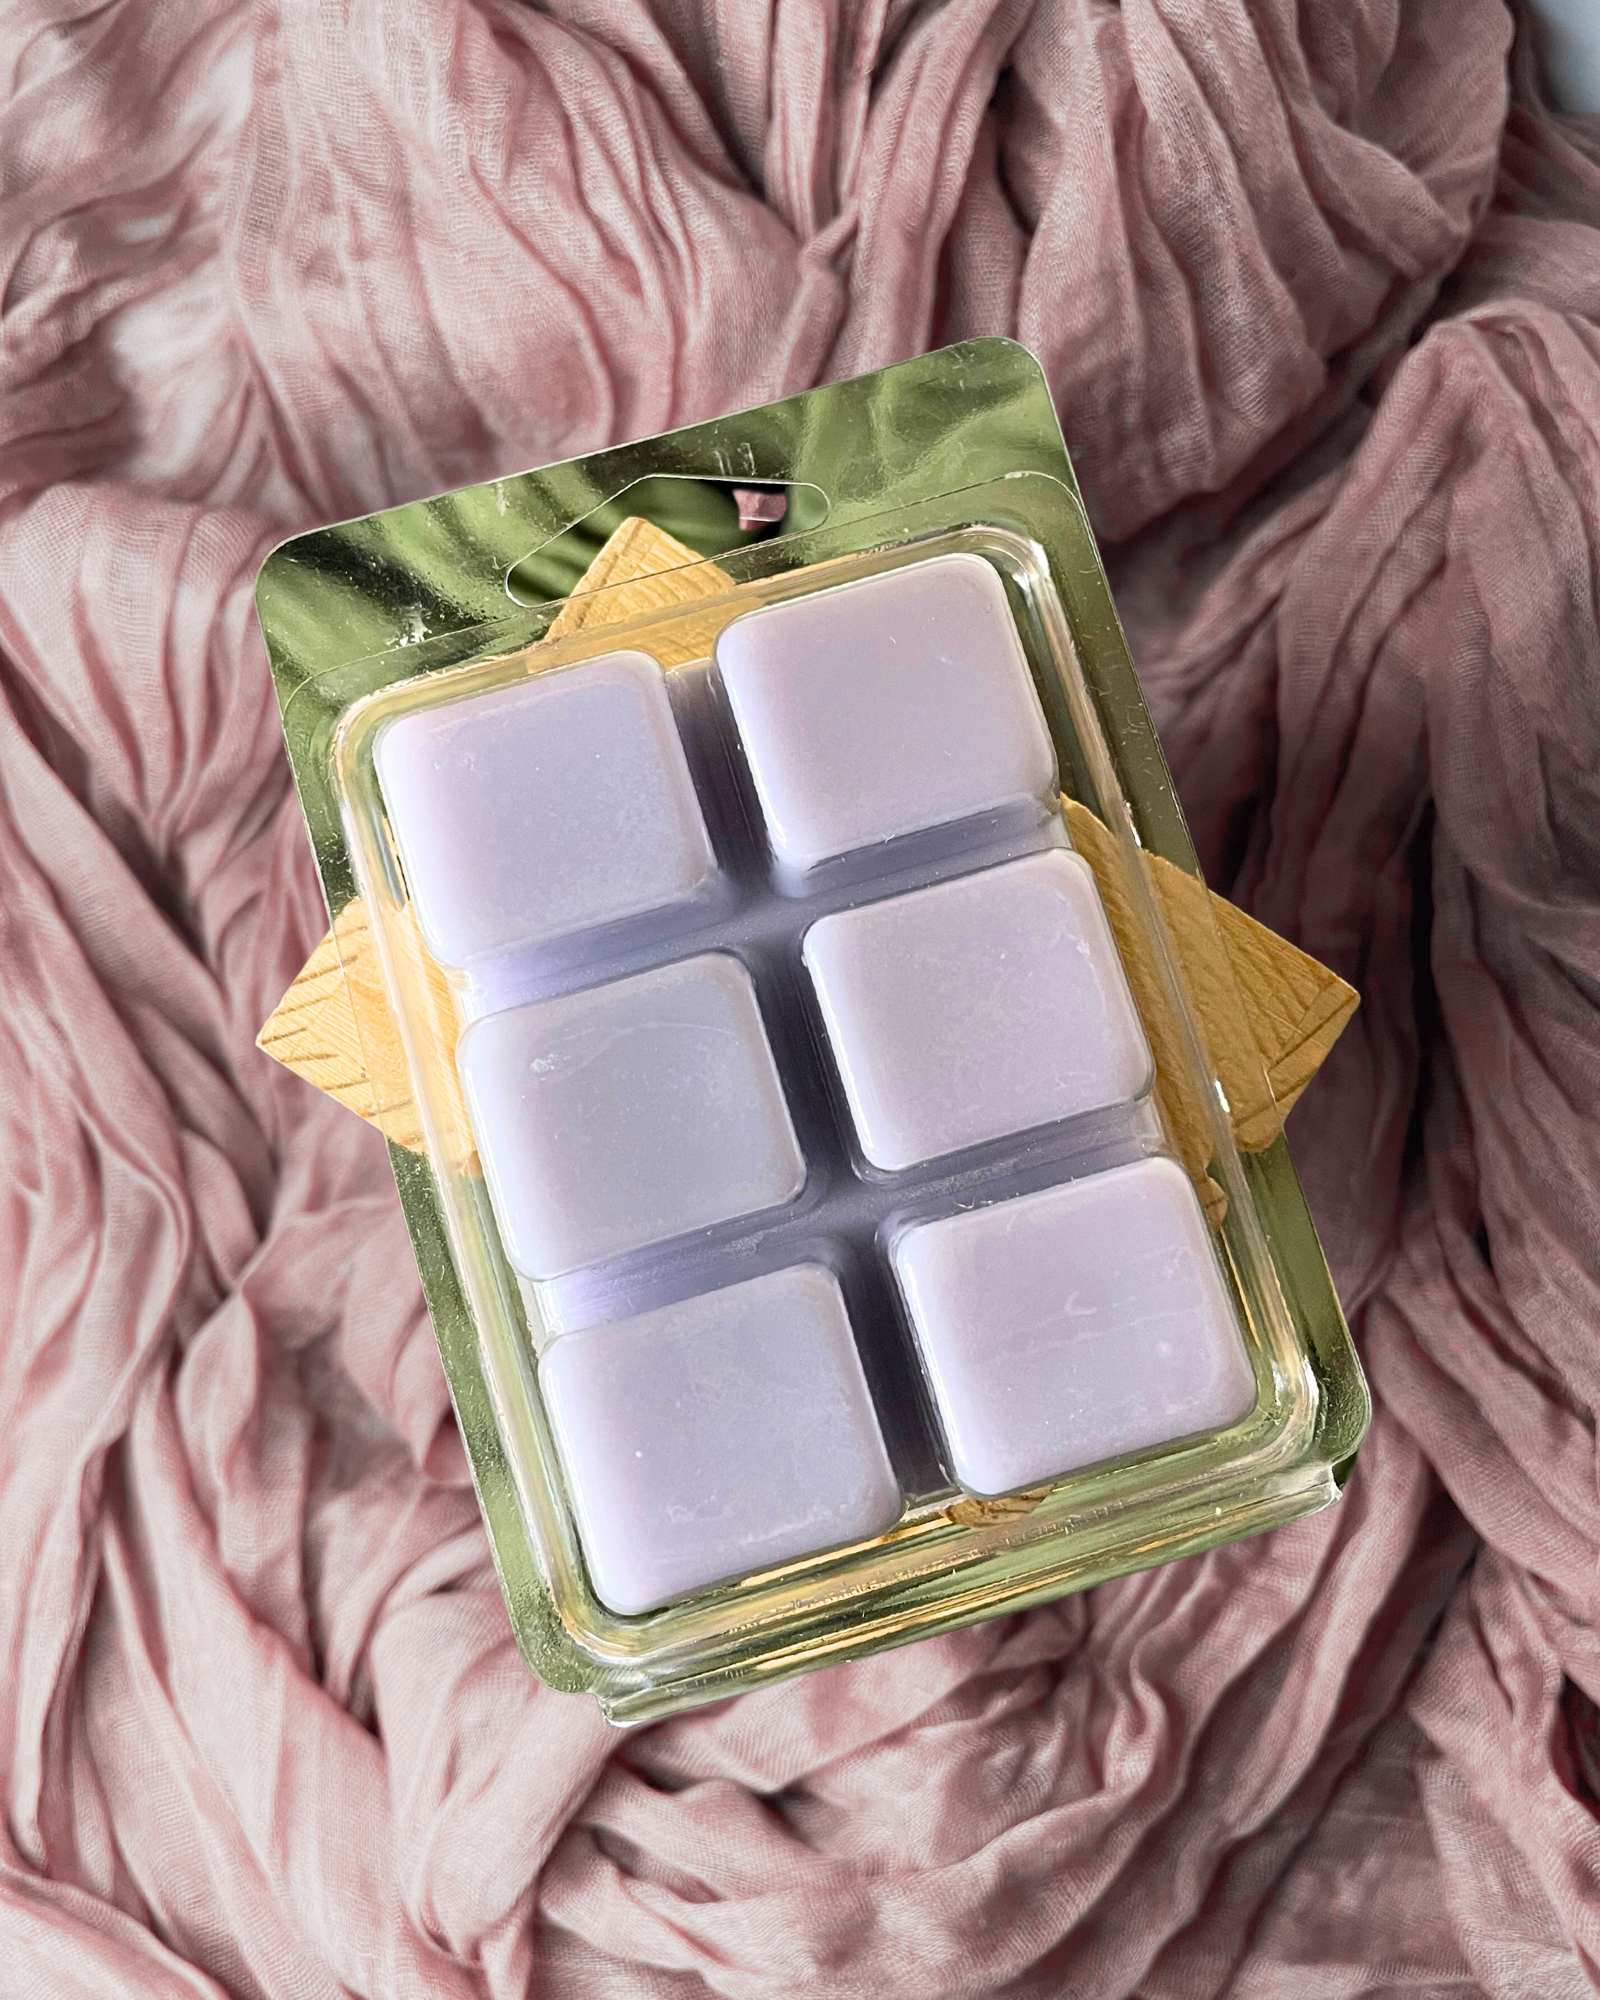 Daydream Soy Wax Melts- Farmhouse Charm has a unique blend of scents that are sure to inspire and bring your dreams to life. It has a note a of citrusy, floral, and spicy scents. The lily gives off a fresh, floral aroma that is complemented by a hint of ginger and underlying citrus notes. These subtle yet powerful scents will transport you to a place of positivity, peace, and creativity, allowing you to live your daydreams.  www.farmhousecharmcandles.com